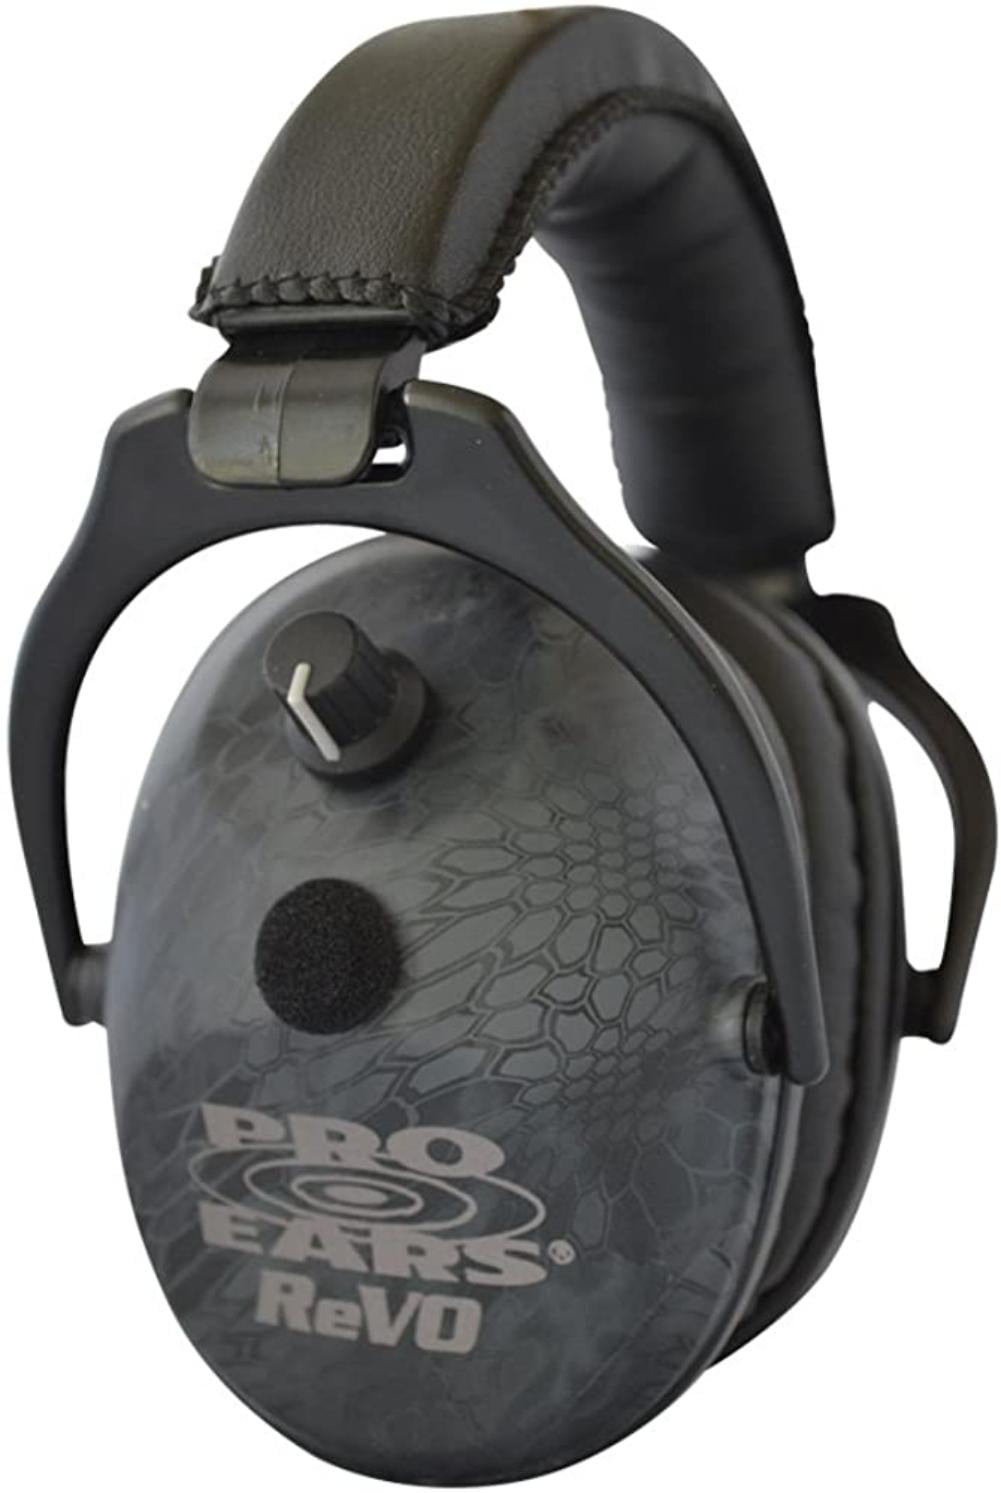 Spypoint EM-24 Ear Muffs Hunting Lightweight Shooting Hearing Protectors Camo 